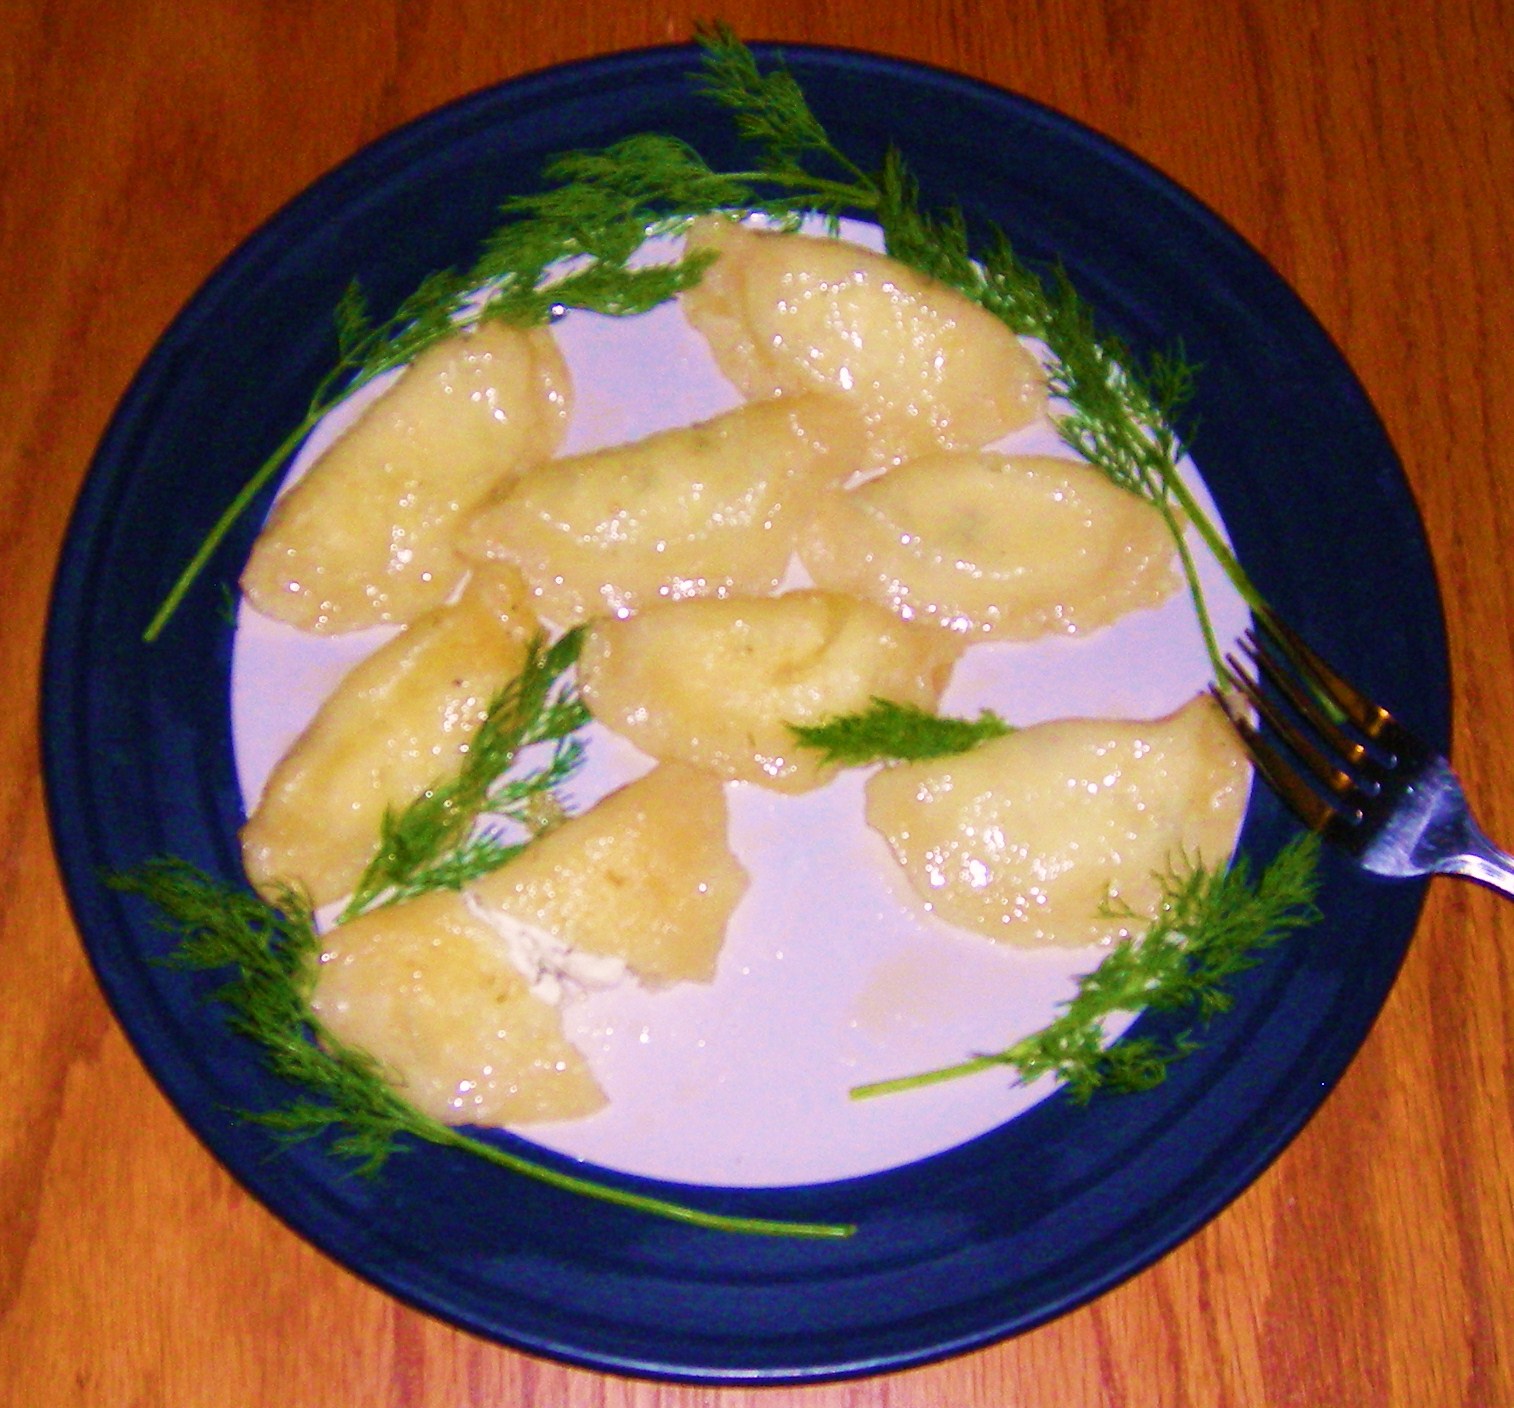 Perogie Pierogi Pyroghi A Classic The Dill And Cottage Cheese